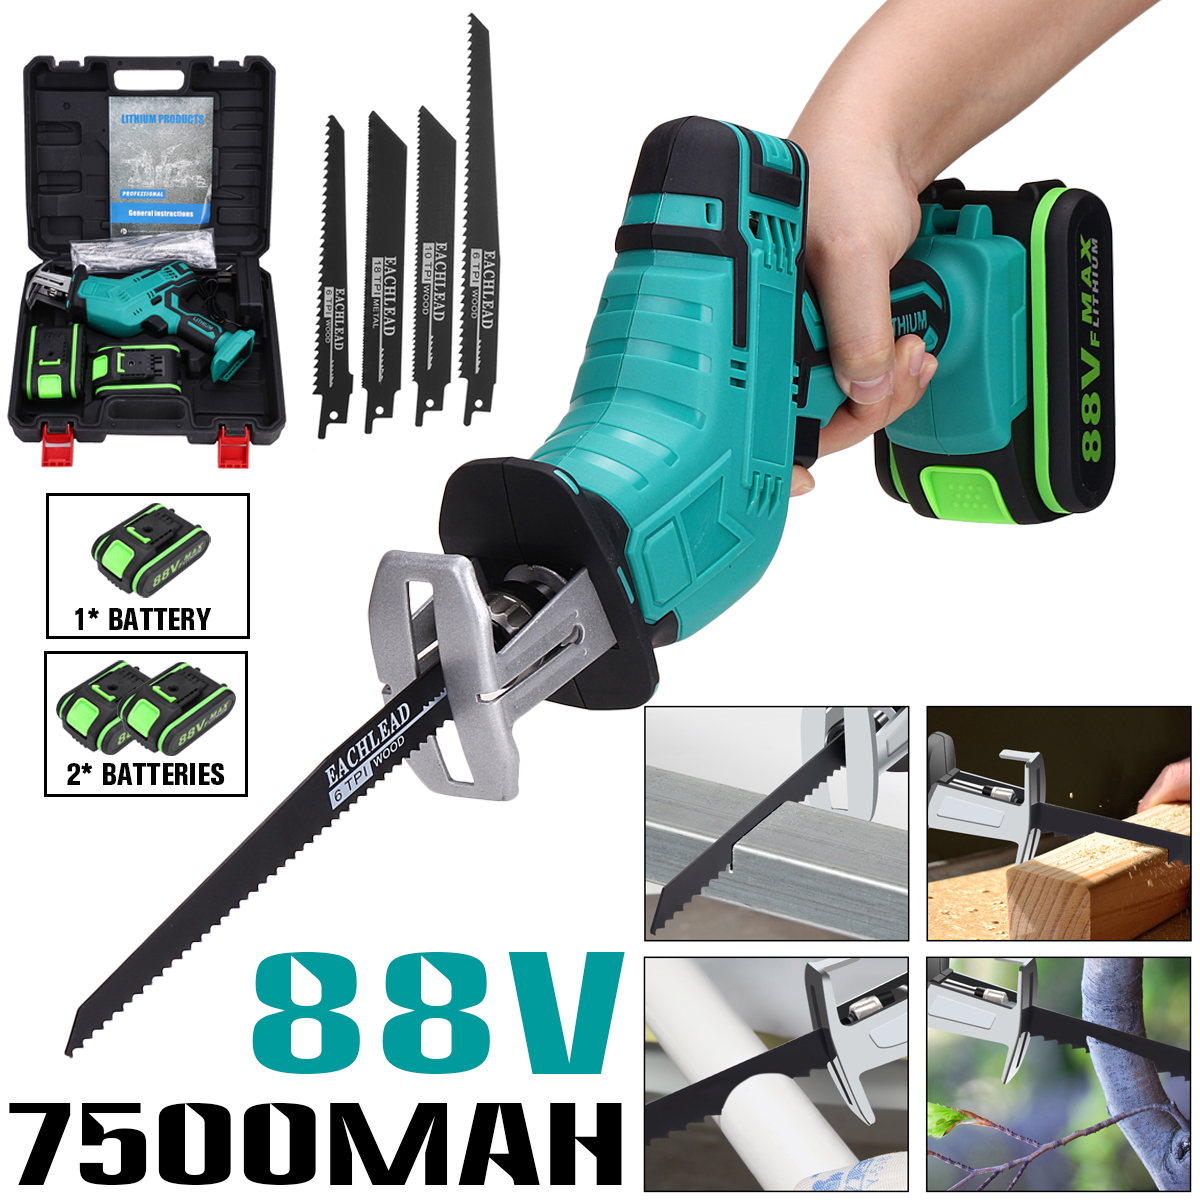 VIOLEWORK-21V-Cordless-Reciprocating-Saw-Electric-Saw-W-4-Saw-Blades-Metal-Cutting-Woodworking-1699270-1